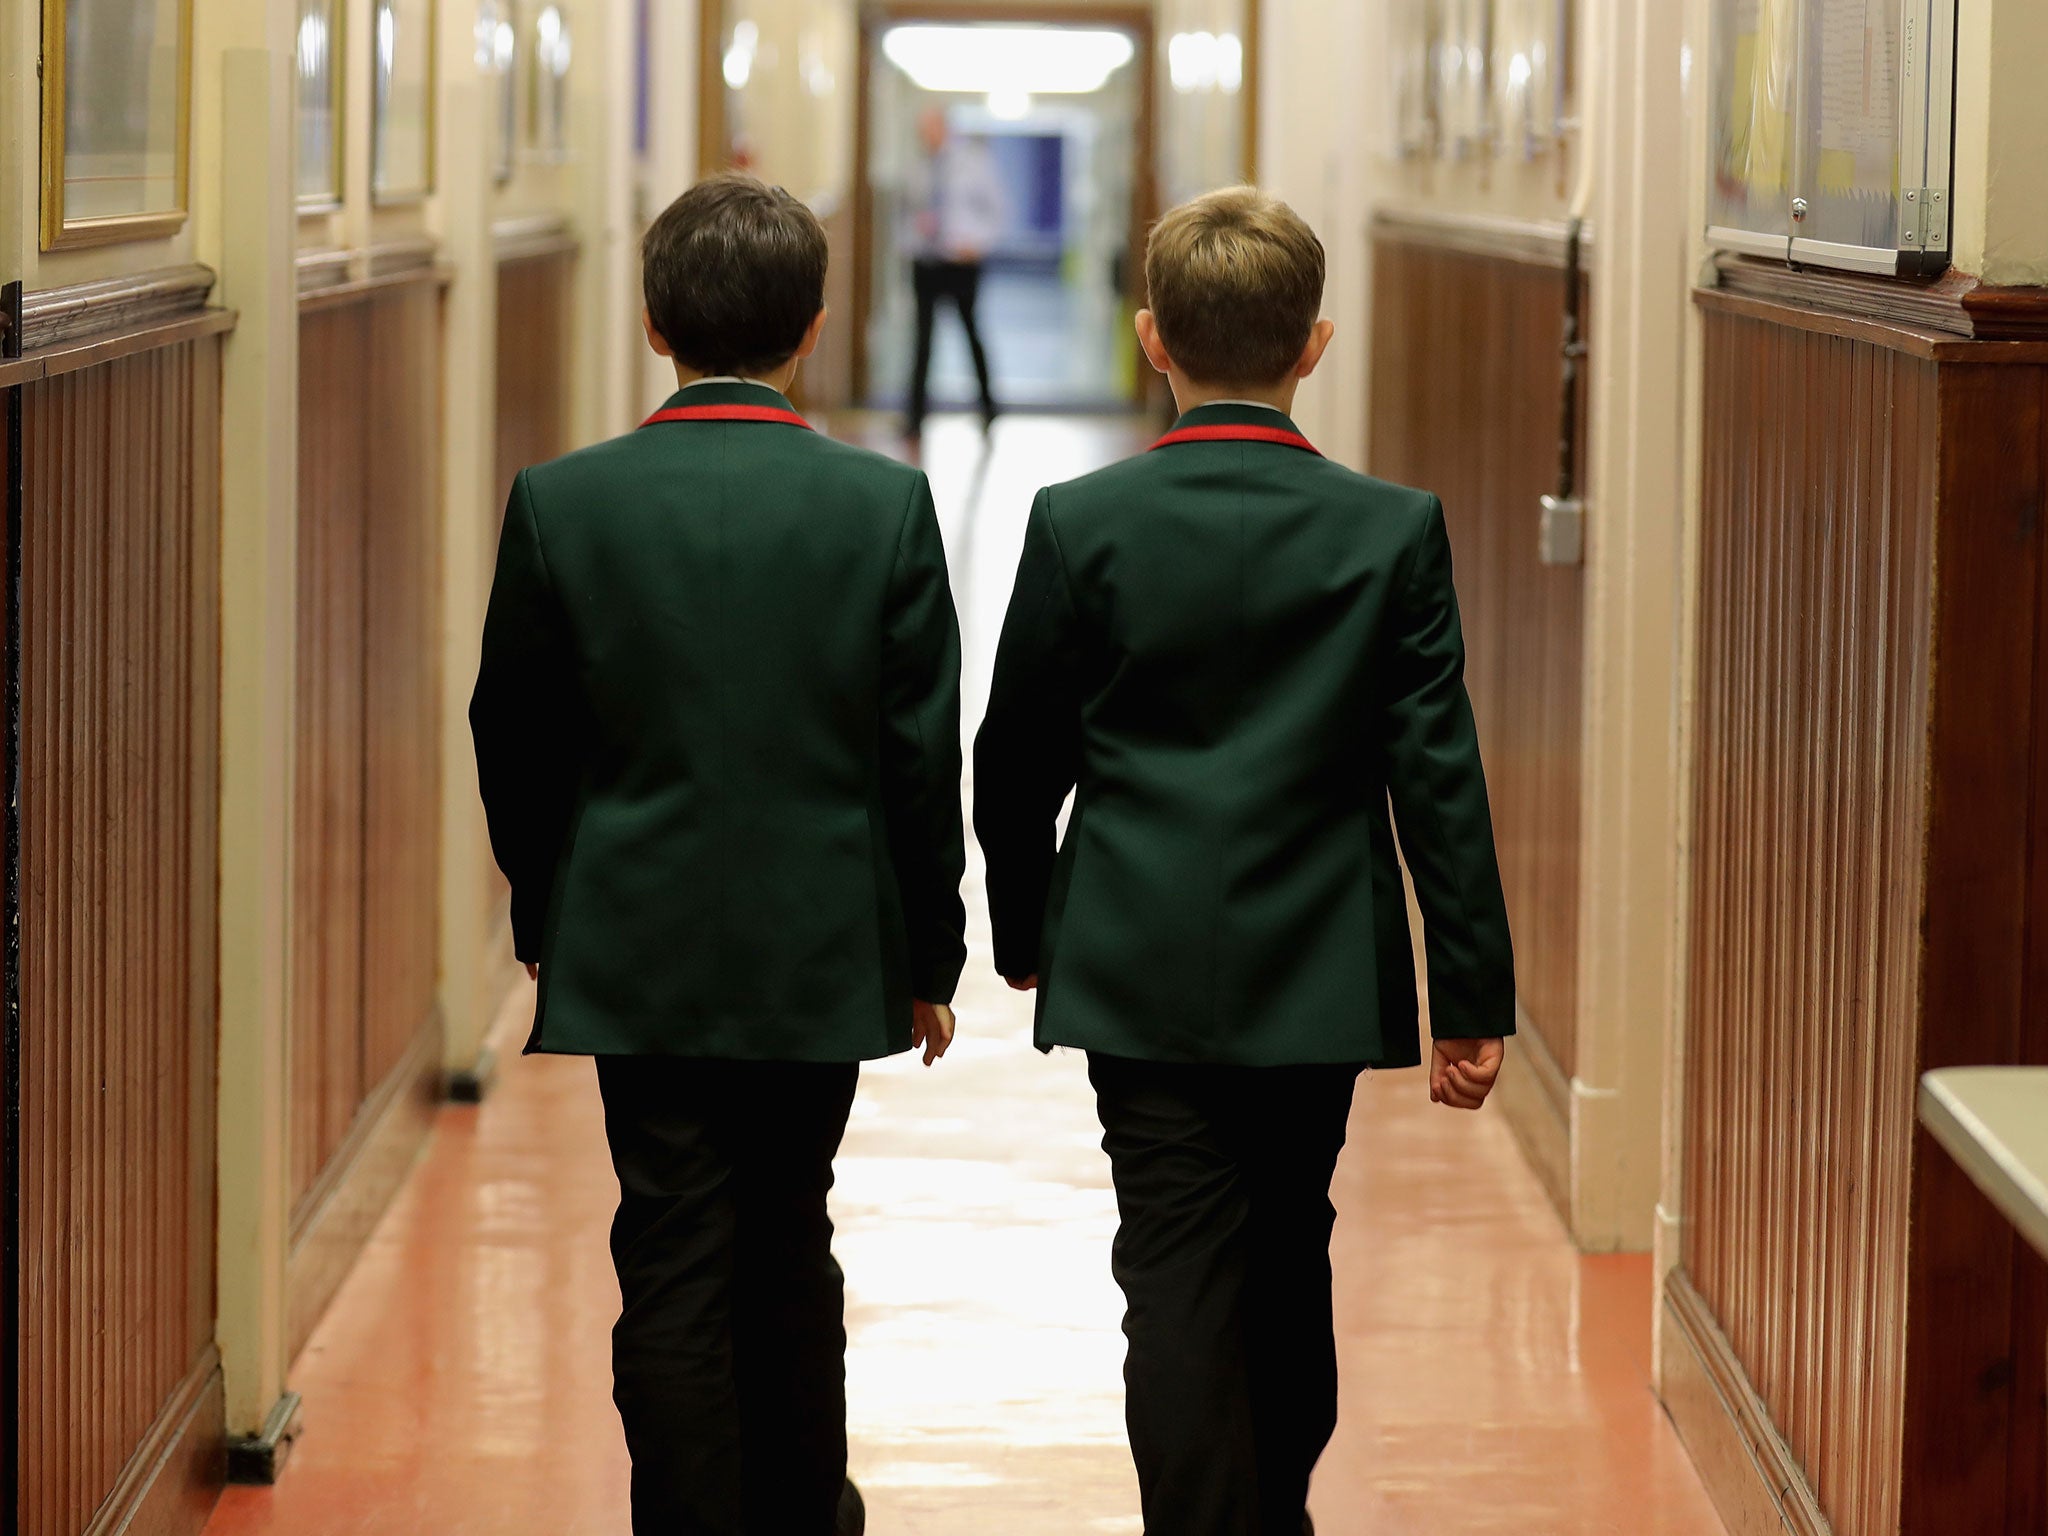 A third of all pupils come from families earning ‘modest’ or below median incomes, the DfE says